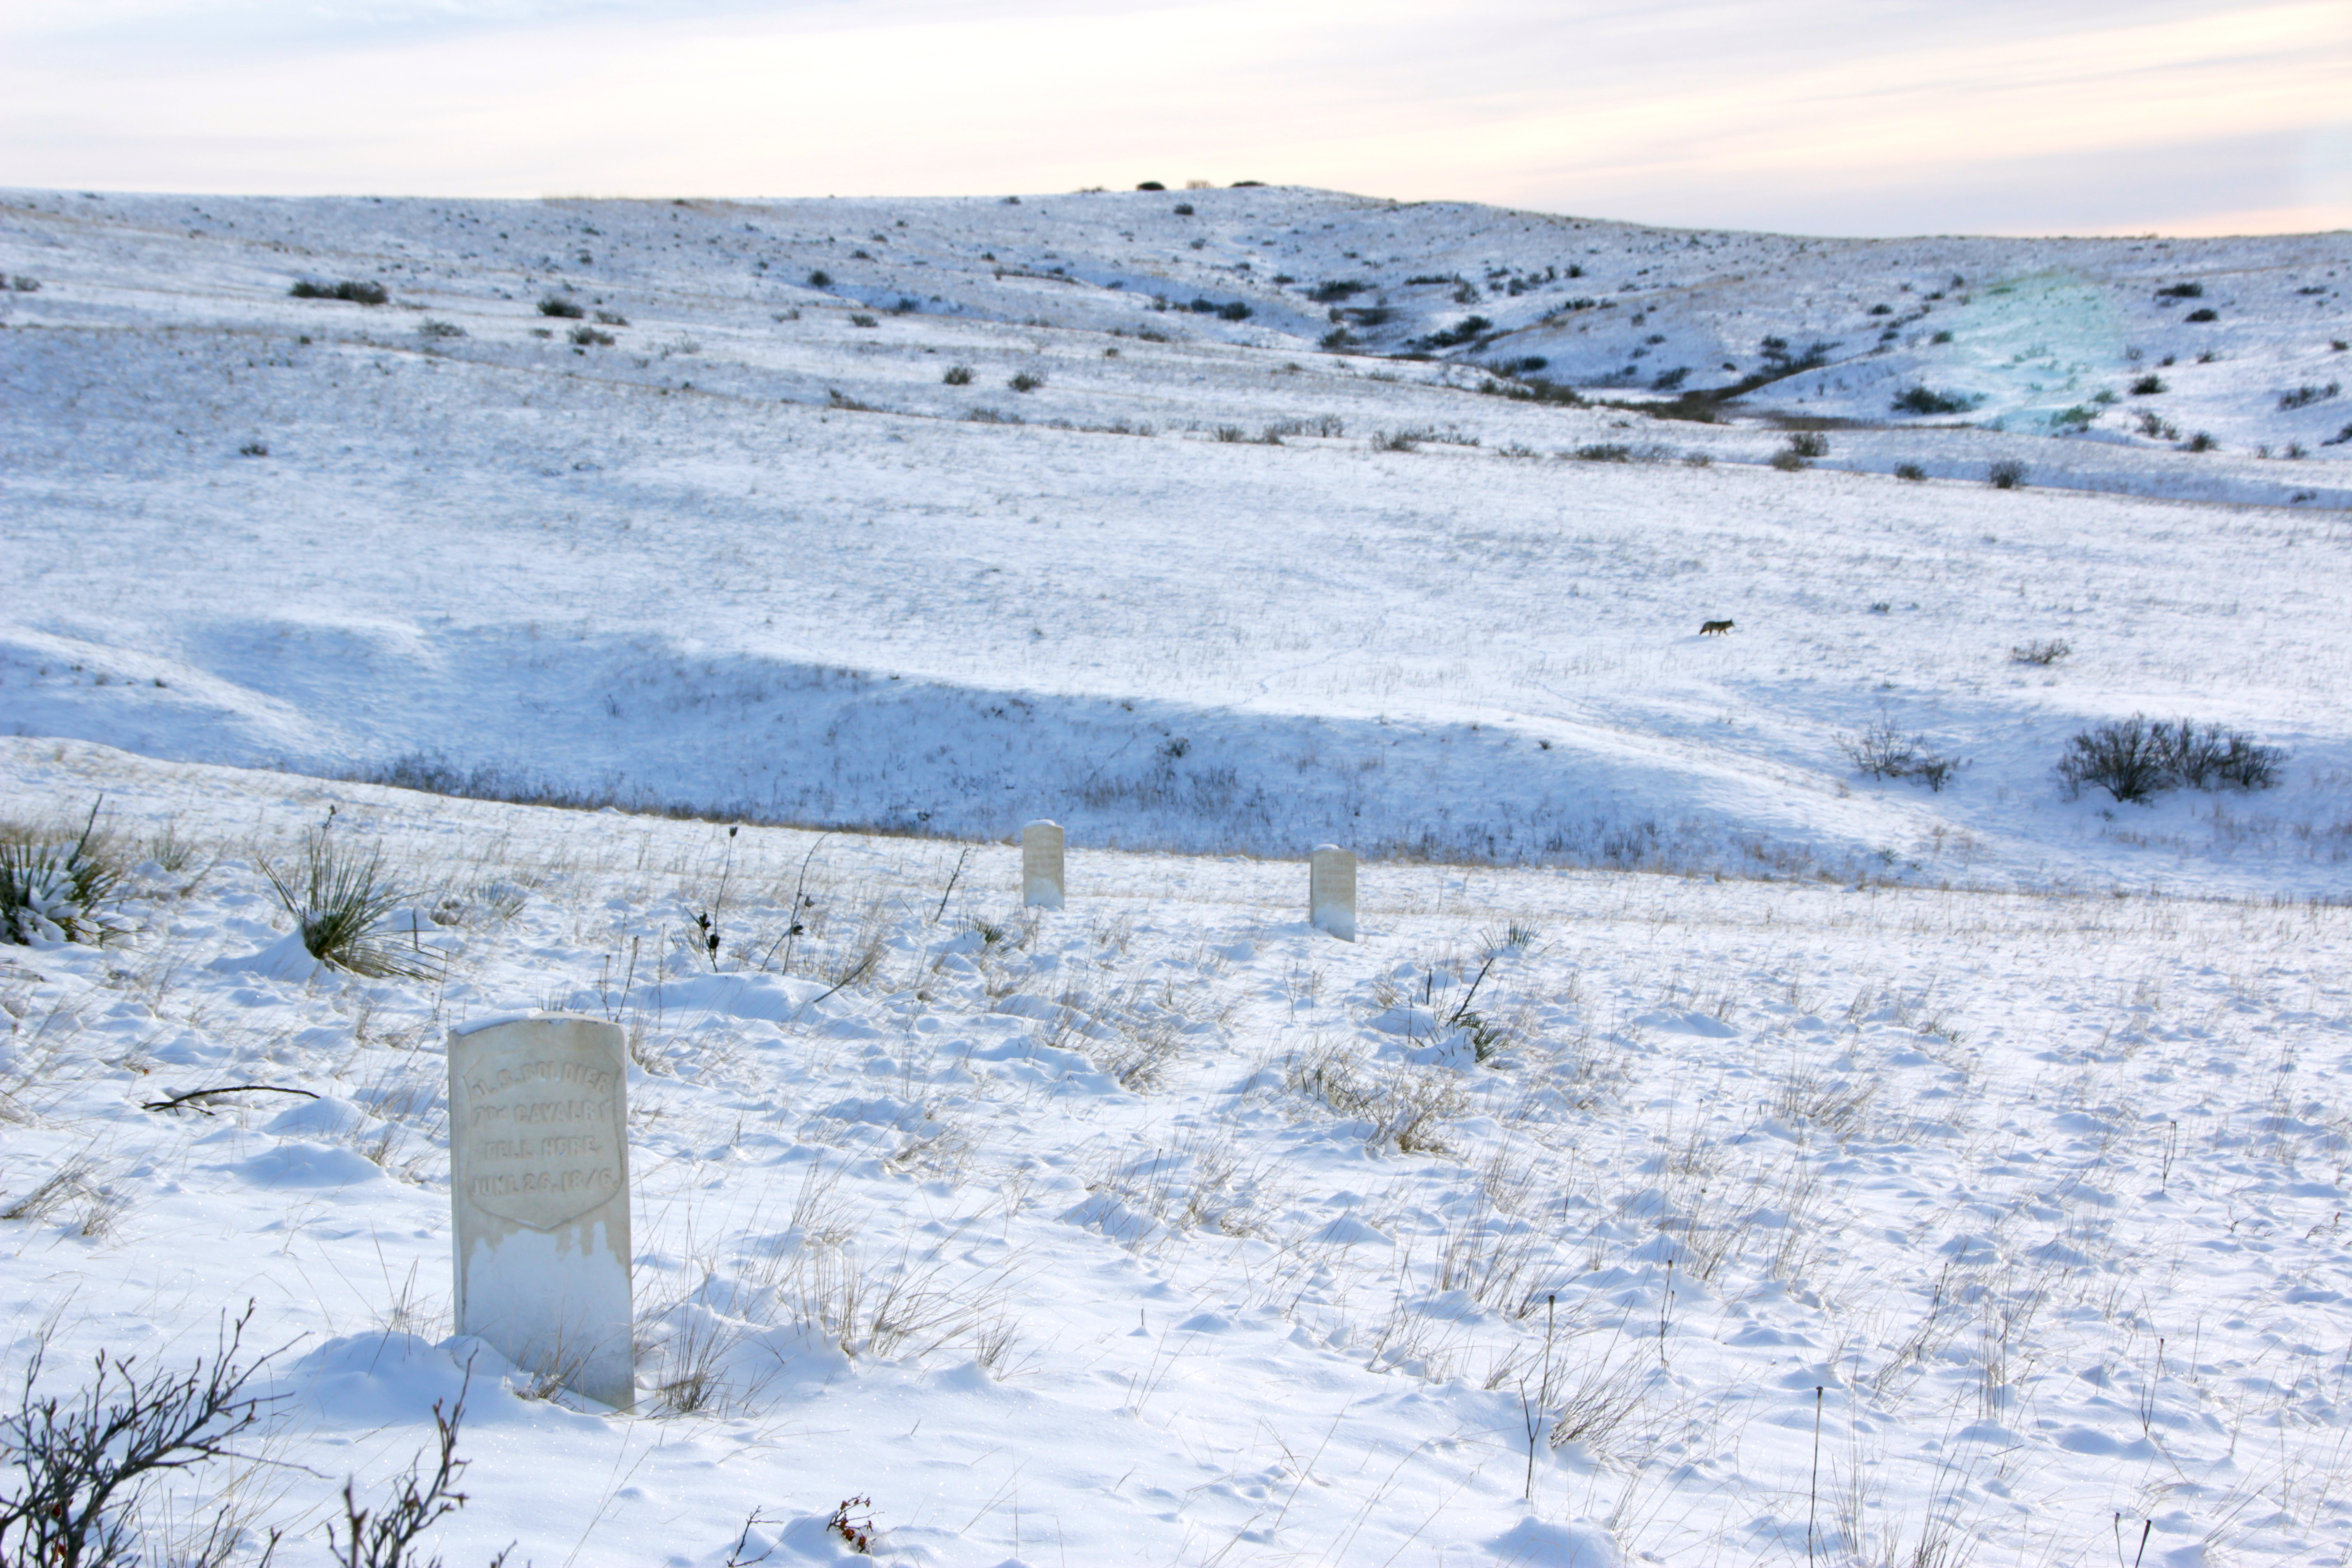 Headstone can still been seen even with the fresh snow that blankets the battlefield .